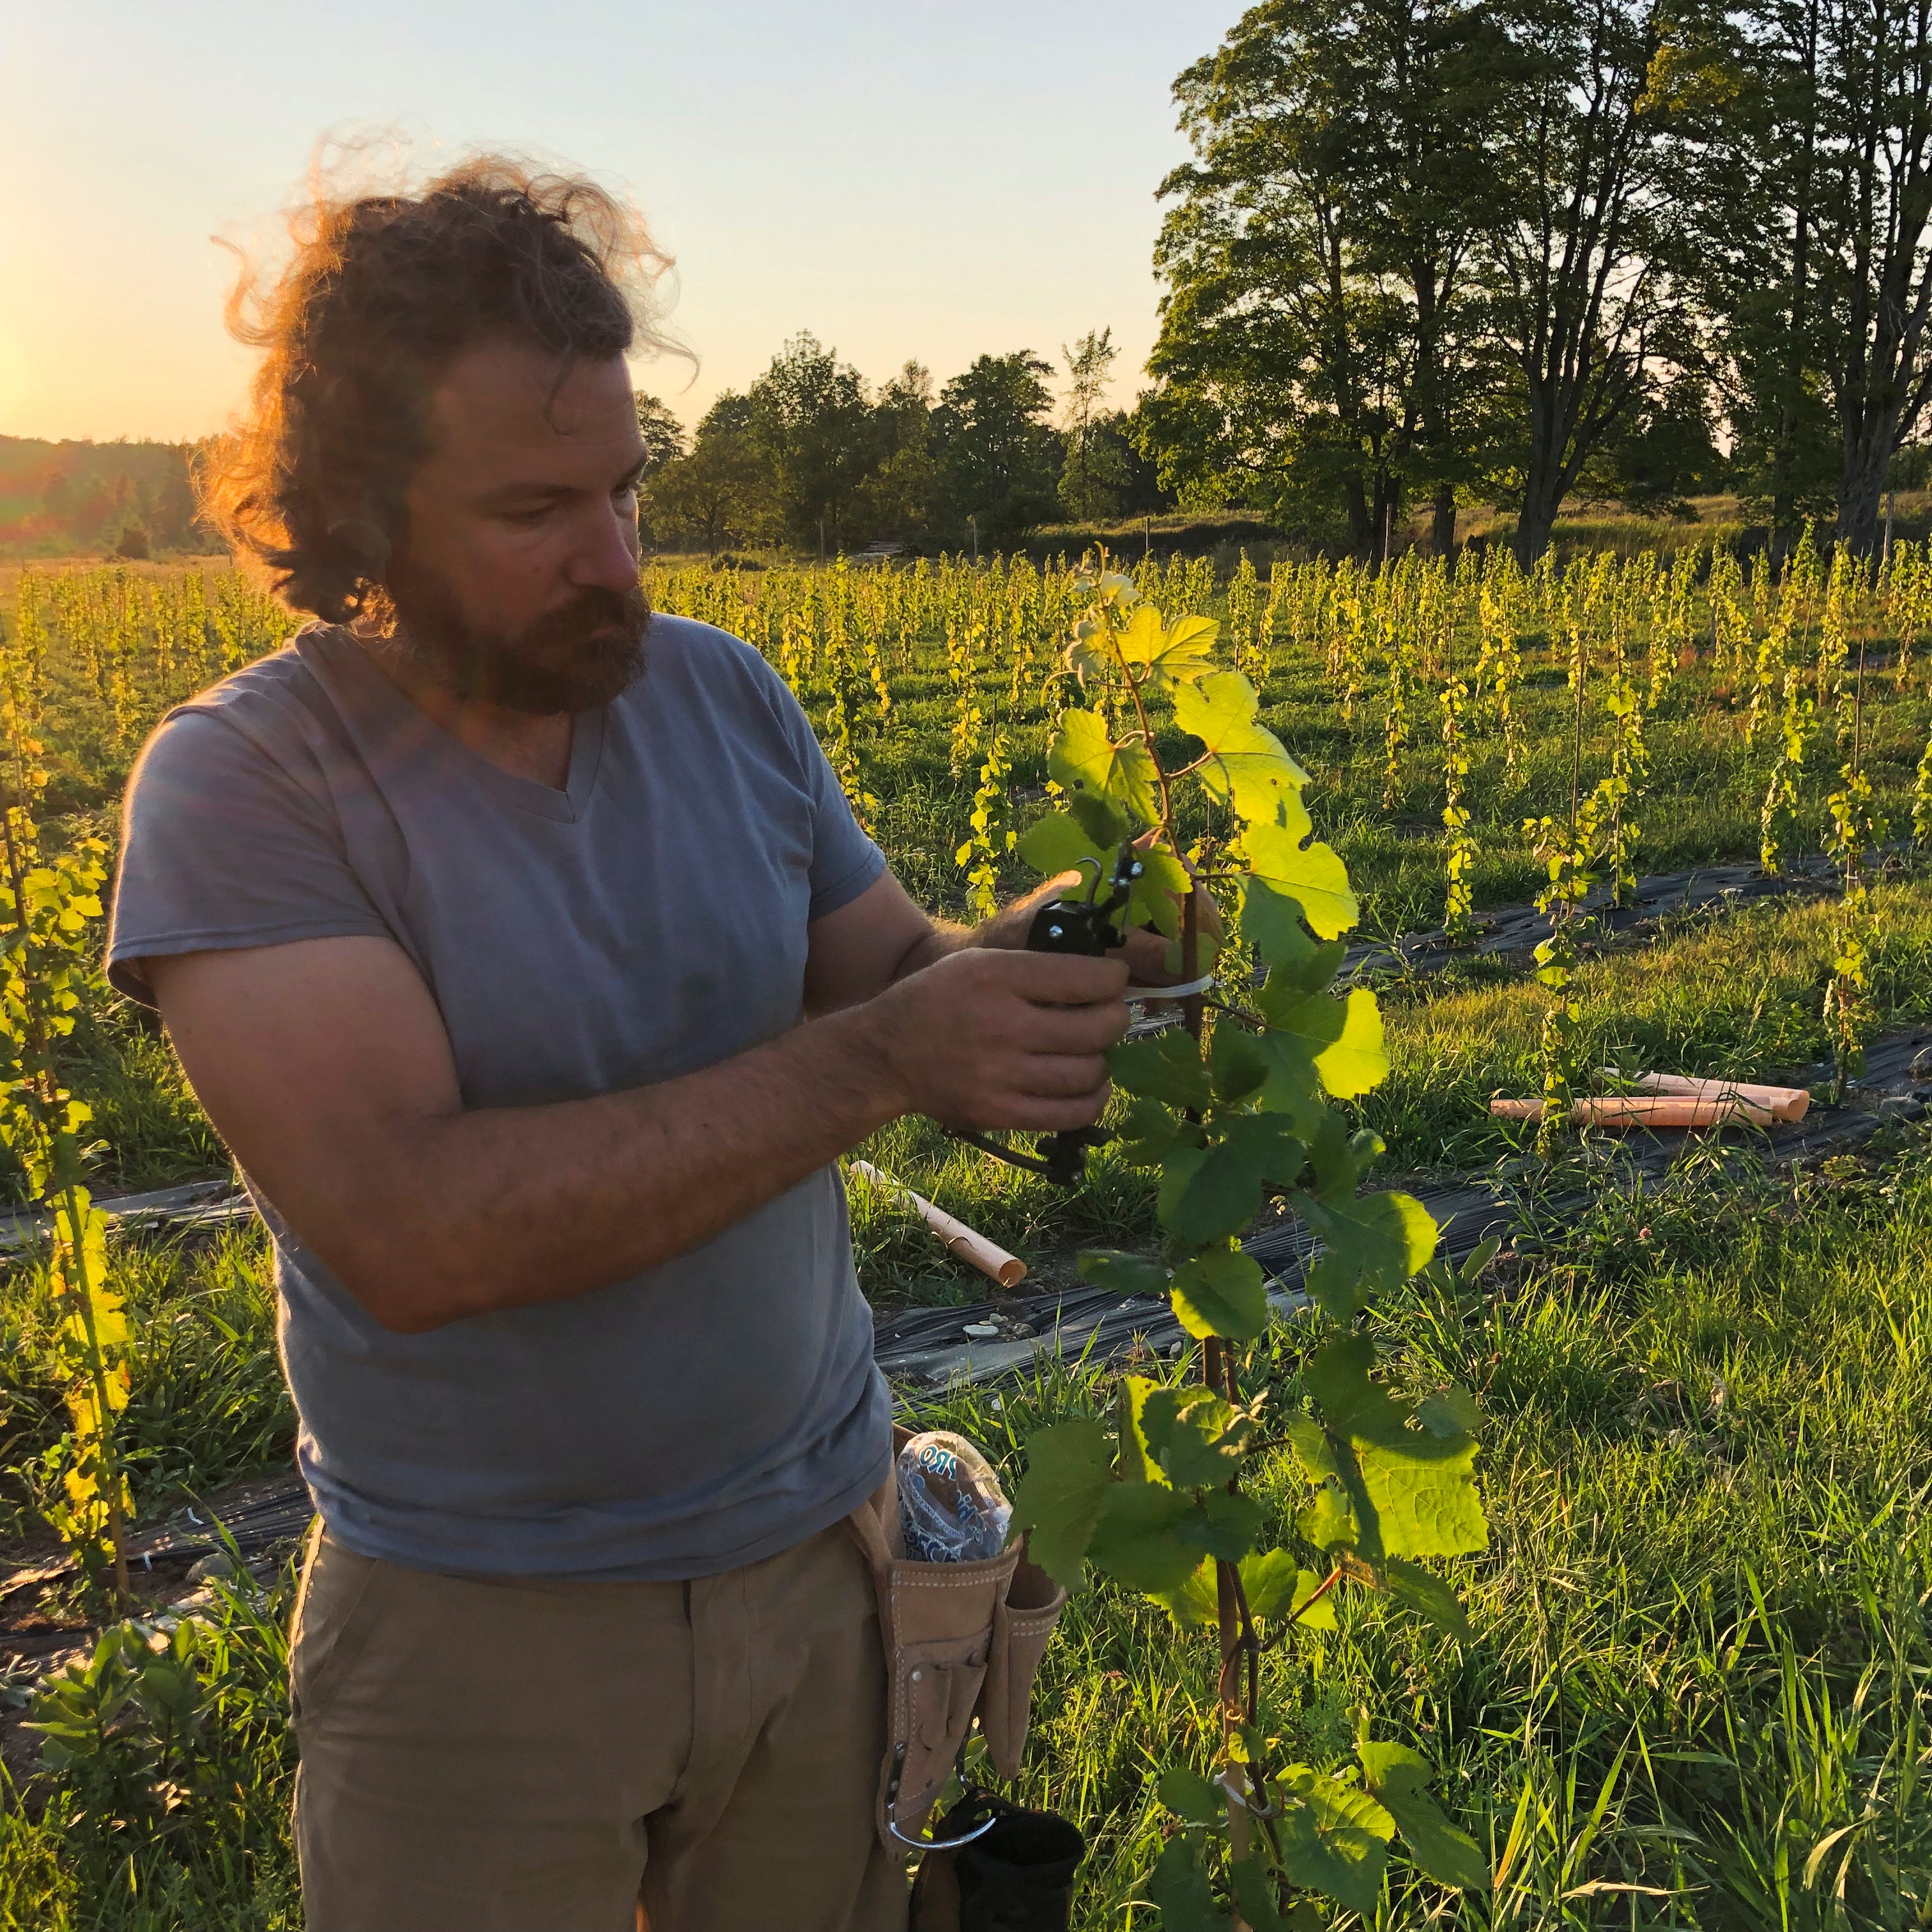 Adam Kendall and his wife Kate Leese (not pictured), carefully tied each vine to a bamboo stake using bio-compostable ties to provide support until a permanent trellis can be installed next year.